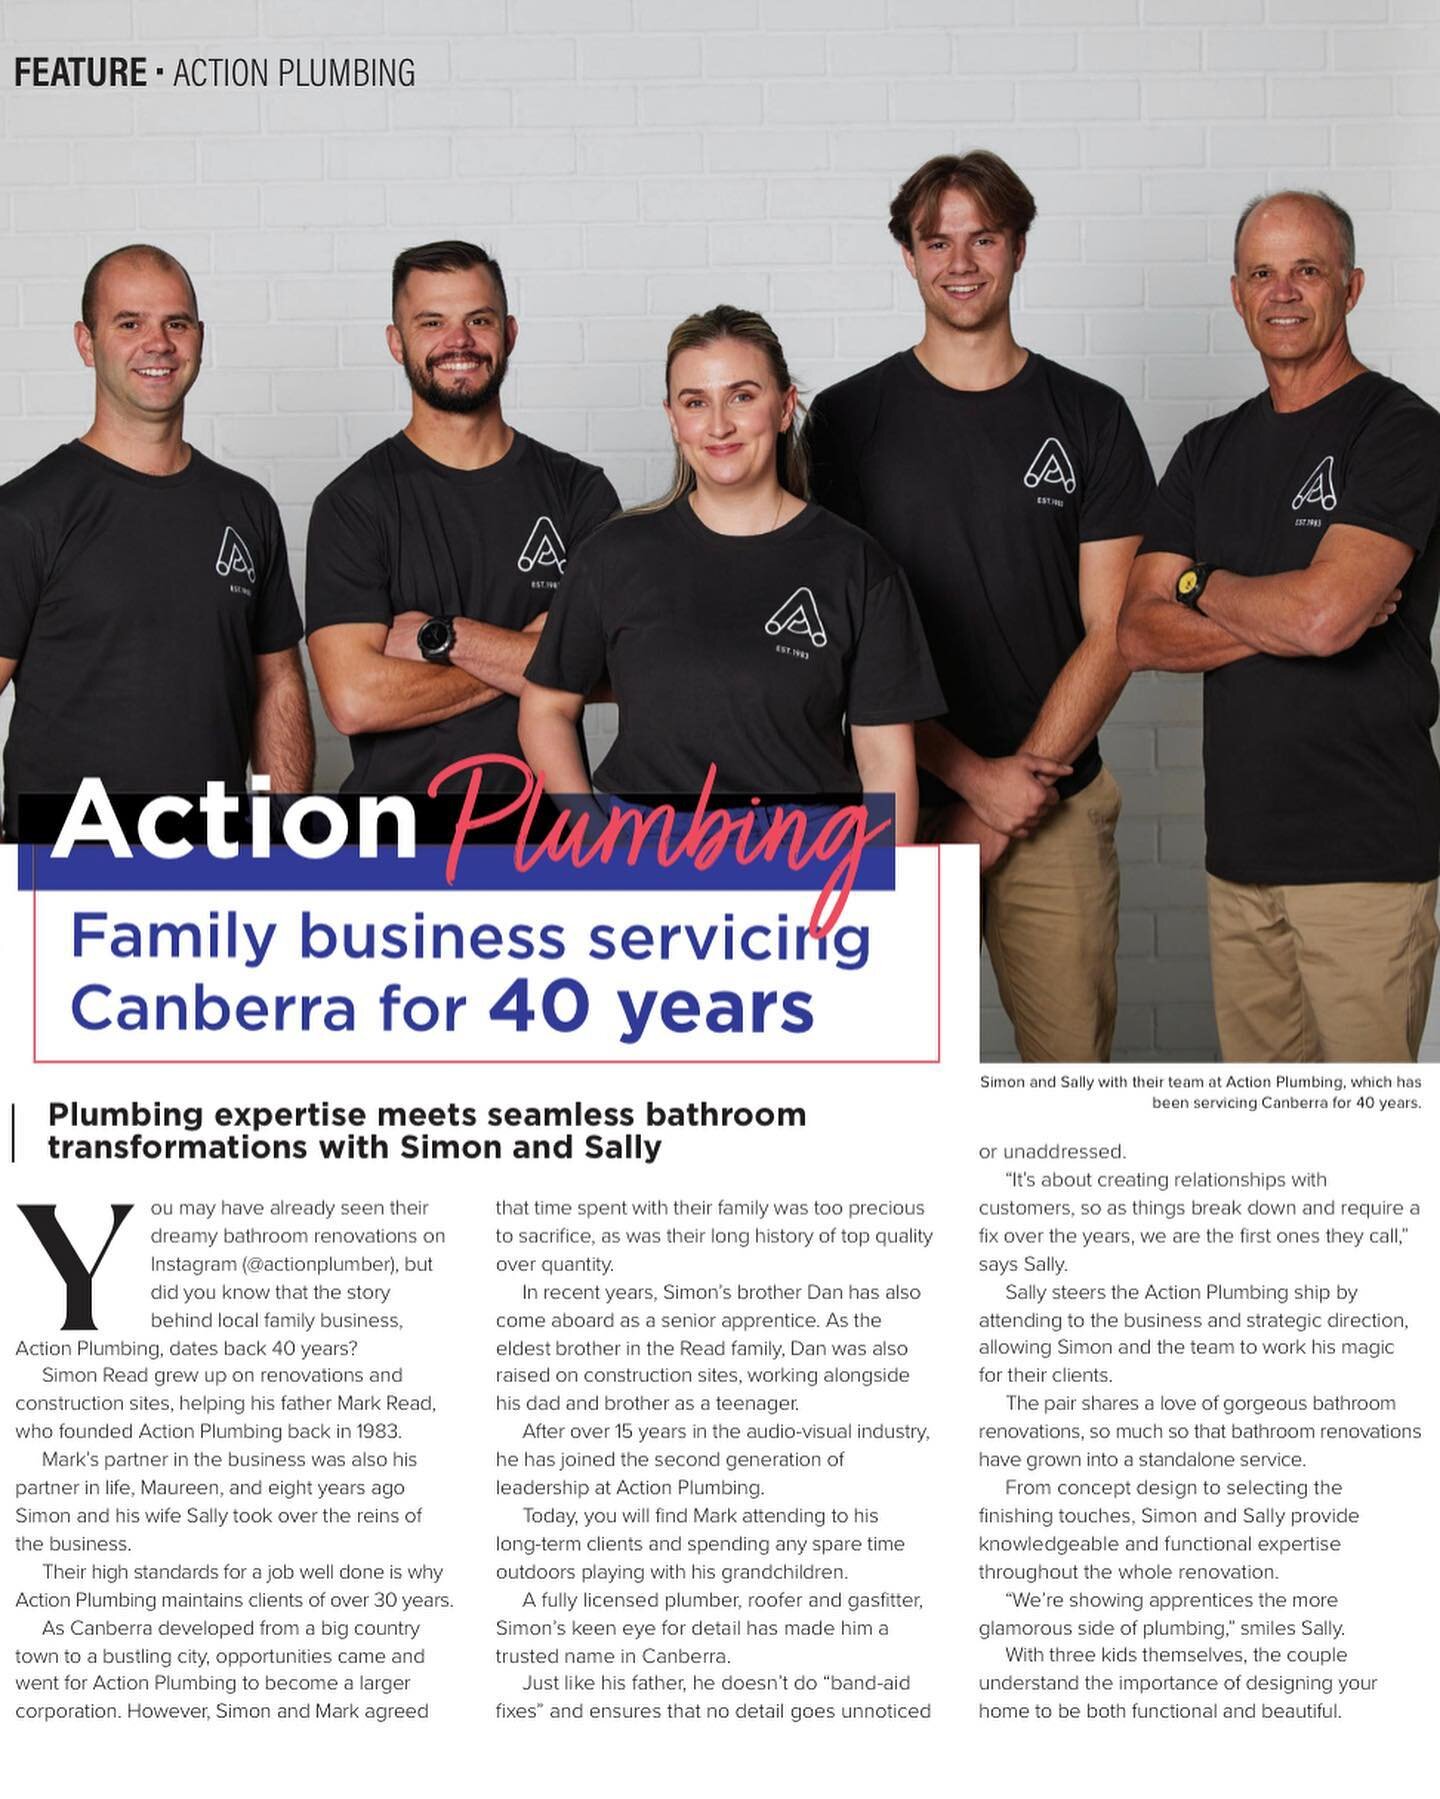 Did you see the article in @canberraweekly magazine this week? Grab a copy and read about Action Plumbing&rsquo;s 40 year history.

#actionplumbing #canberraplumber #canberrabathroomrenovation